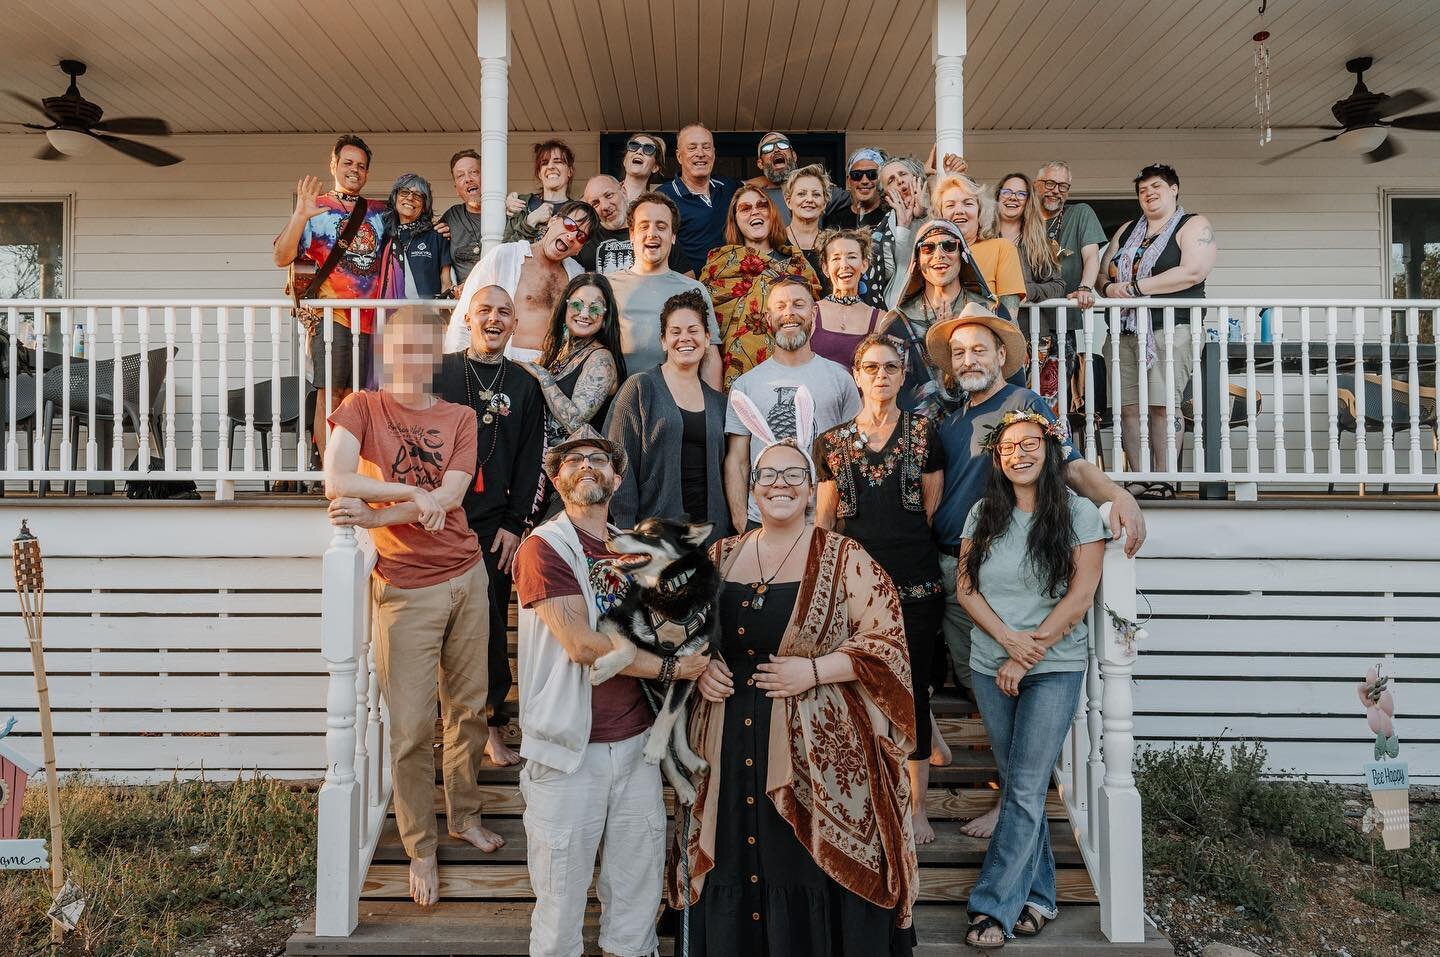 We cannot praise this group of people enough. We all came together in the mountains of Tennessee to plant new seeds and enter a season of rebirth, and every single one of them showed up to do this sacred work. They were dedicated, serious, and while 